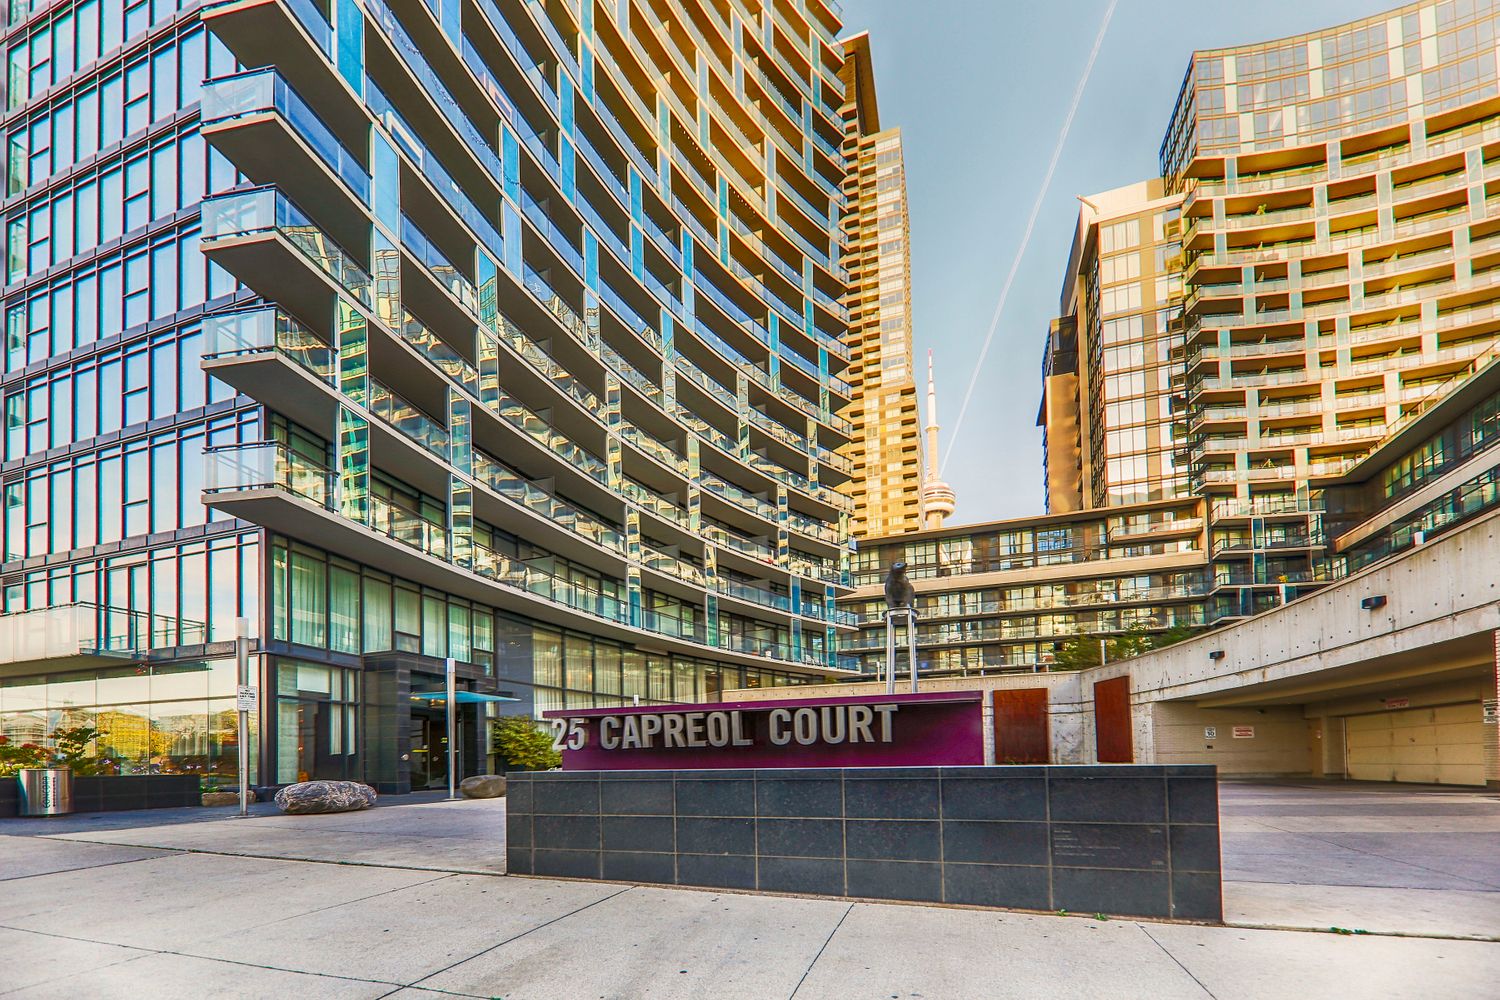 25 Capreol Court. Luna Vista Condos is located in  Downtown, Toronto - image #5 of 5